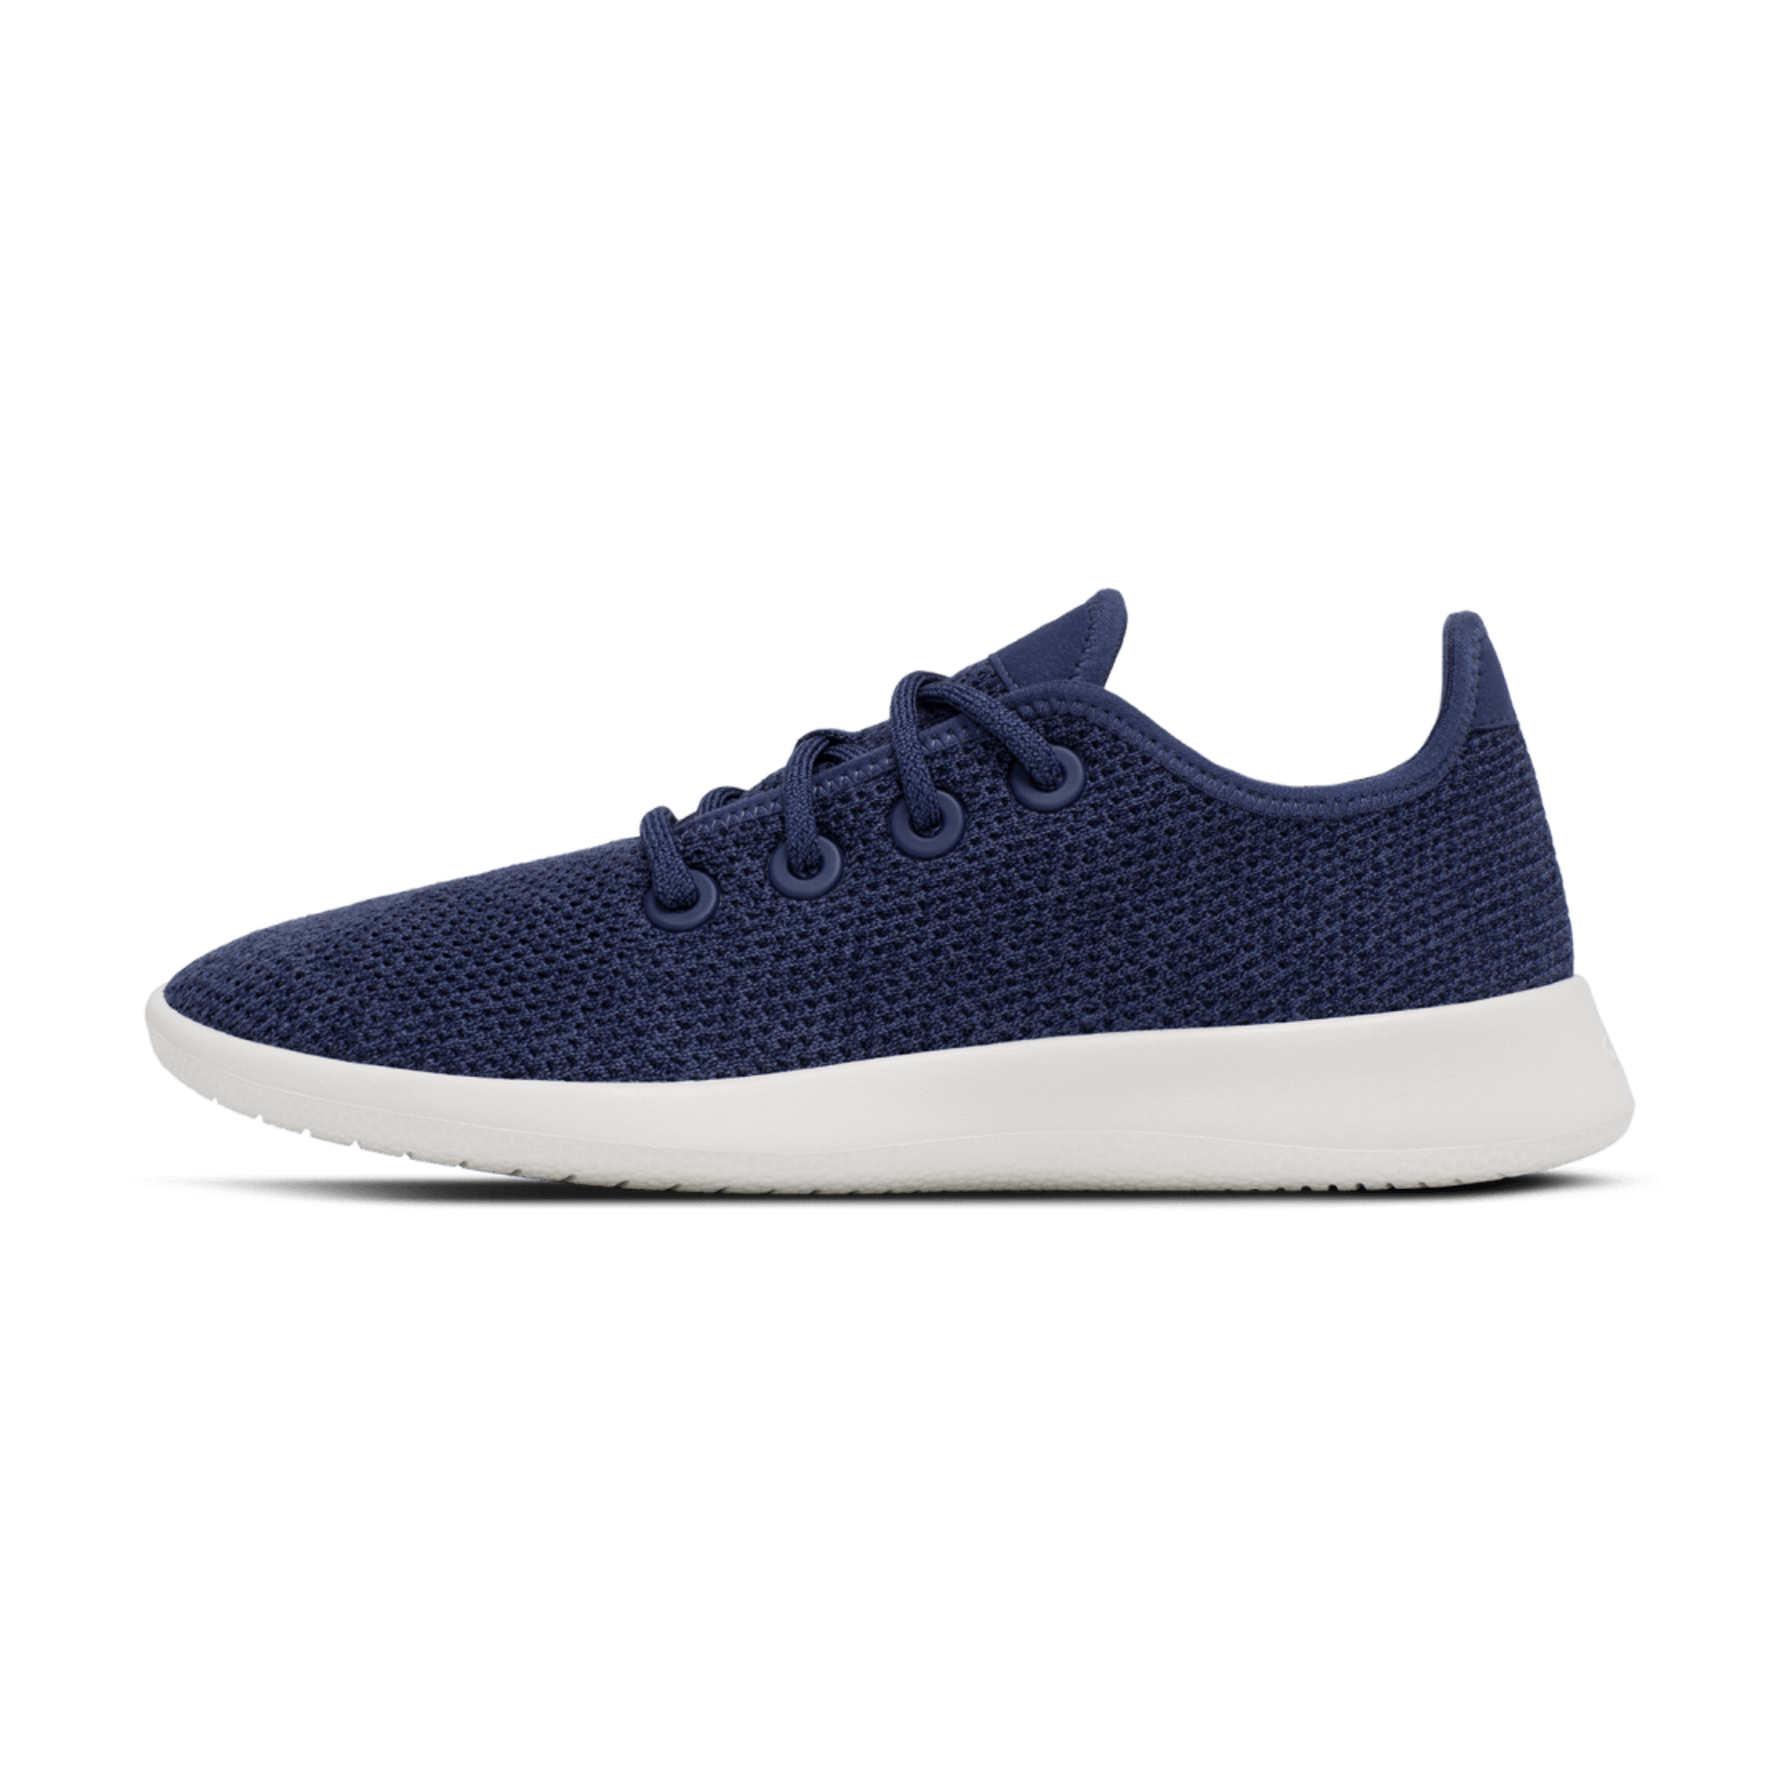 Tree Runners for Women, Everyday Sneakers